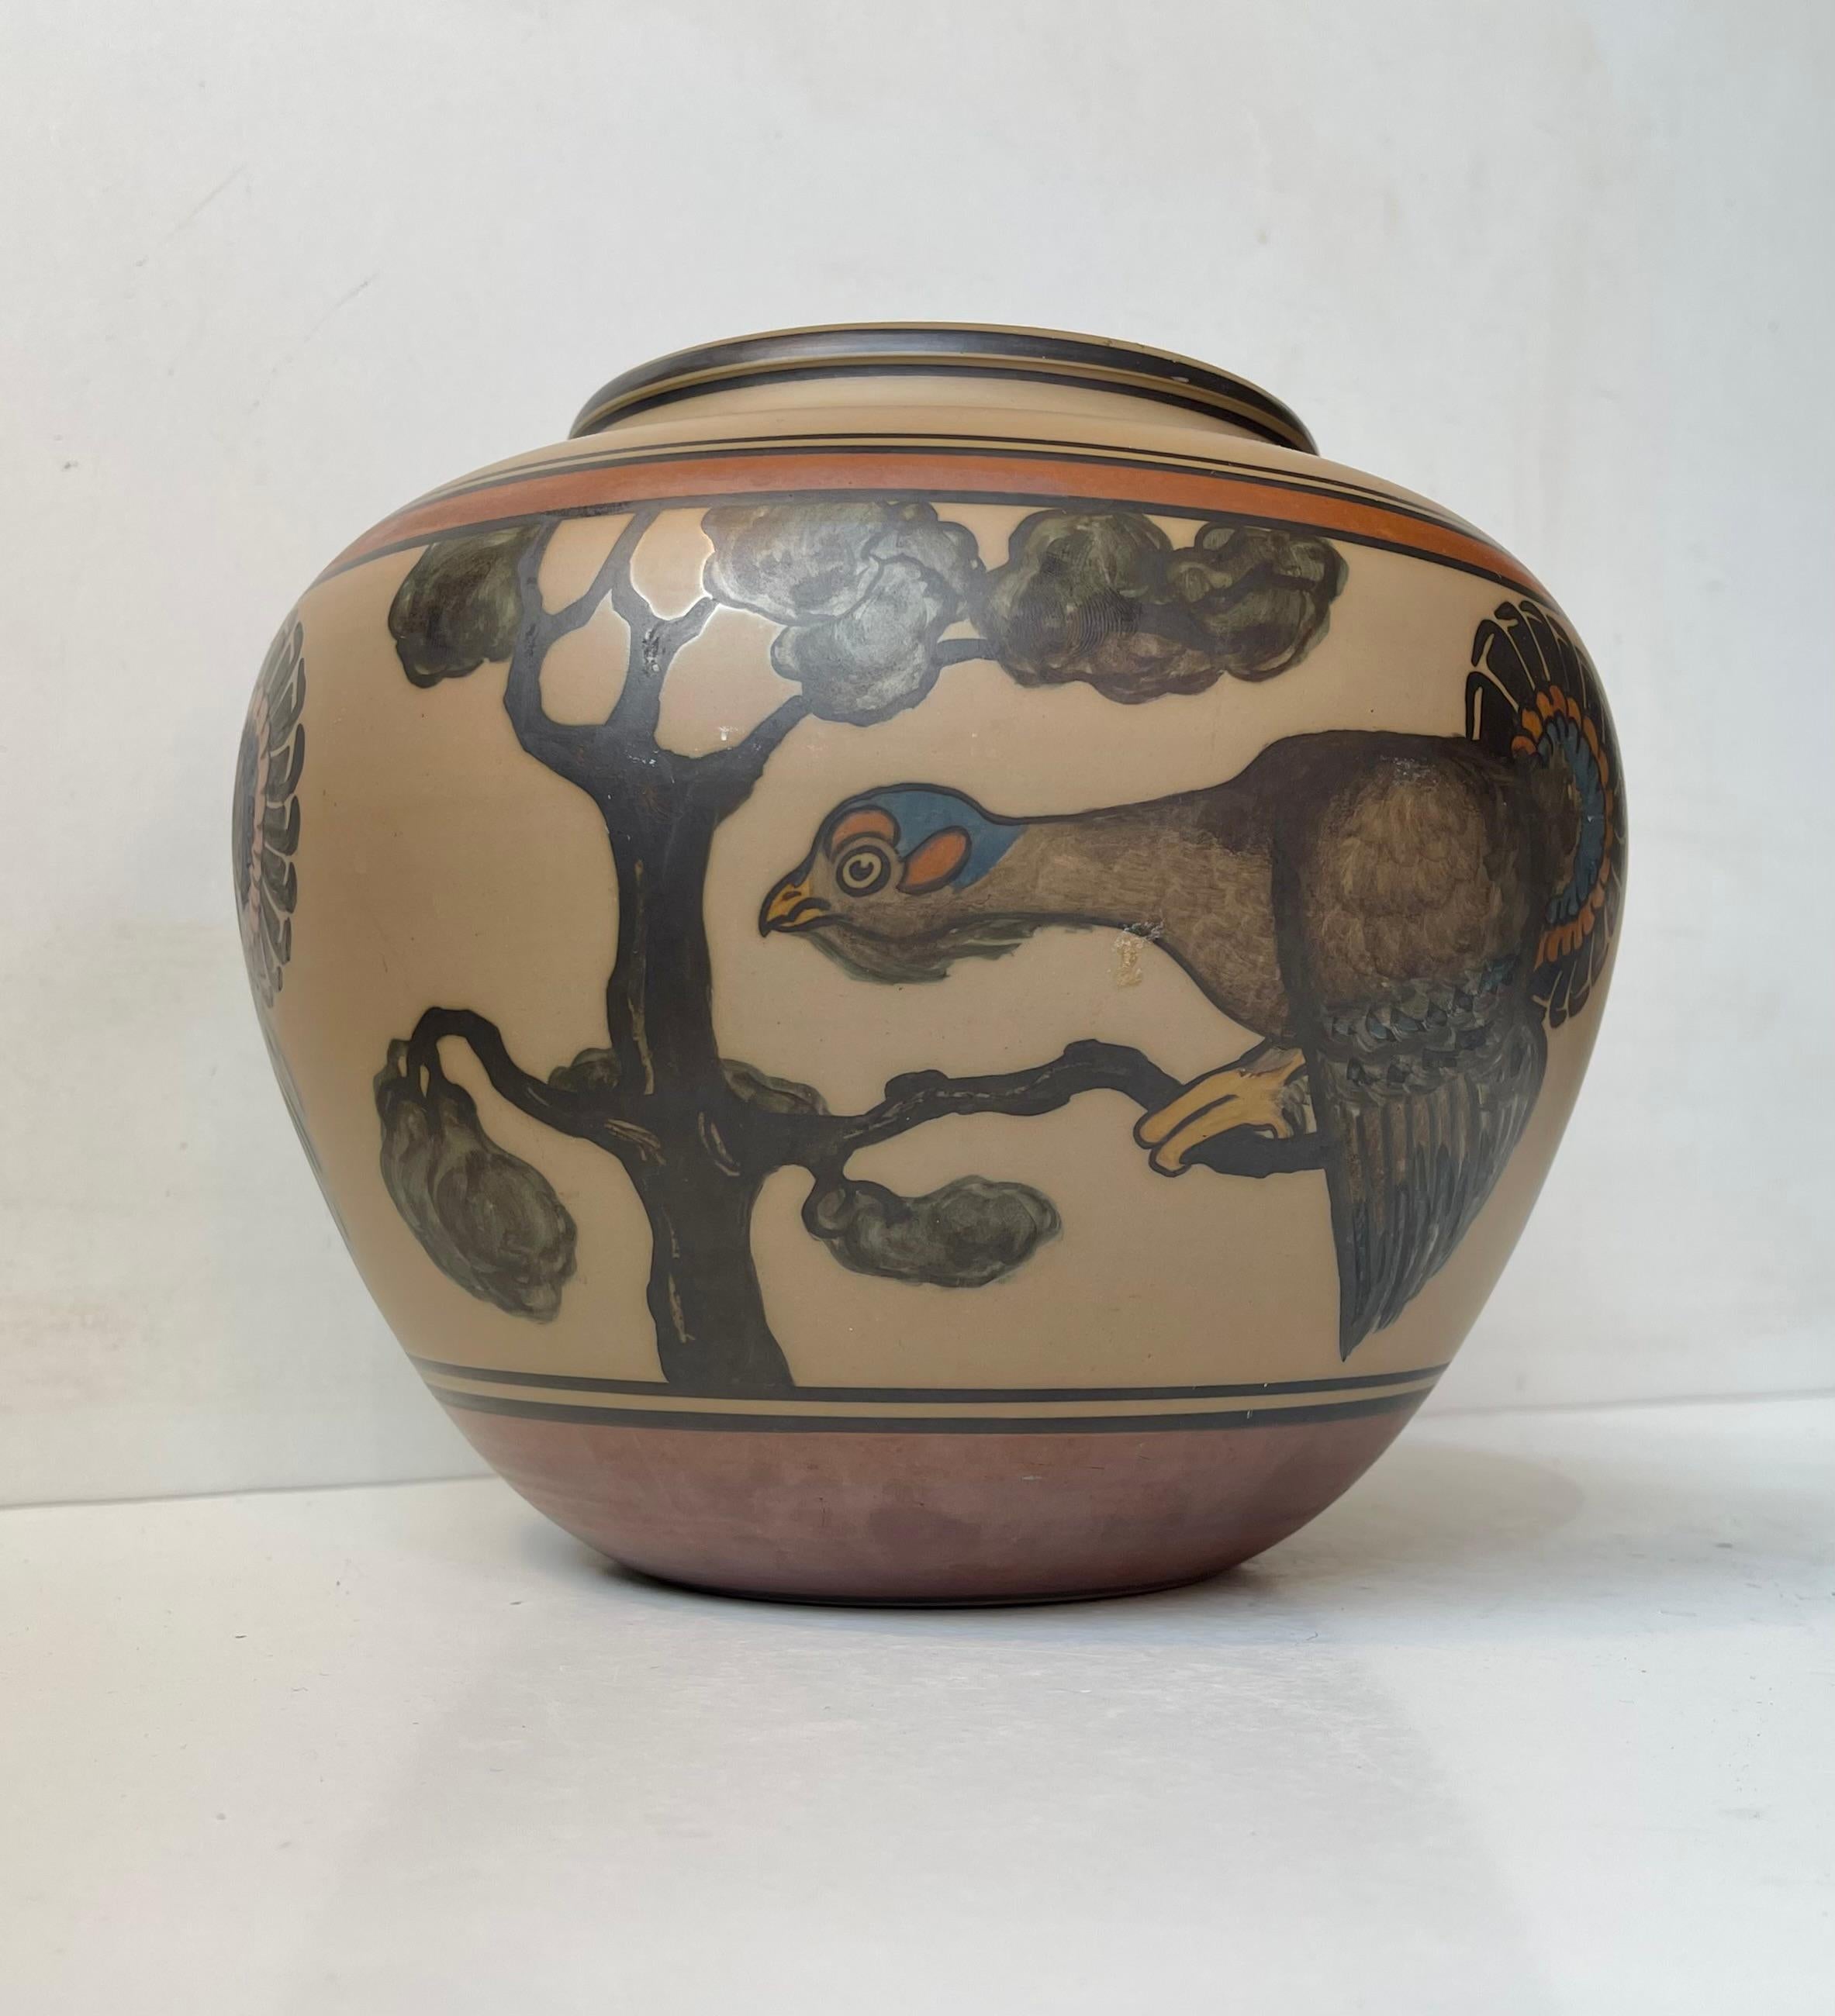 L. Hjorth Hand-Painted Terracotta Planter with Peacock, 1940s In Good Condition For Sale In Esbjerg, DK